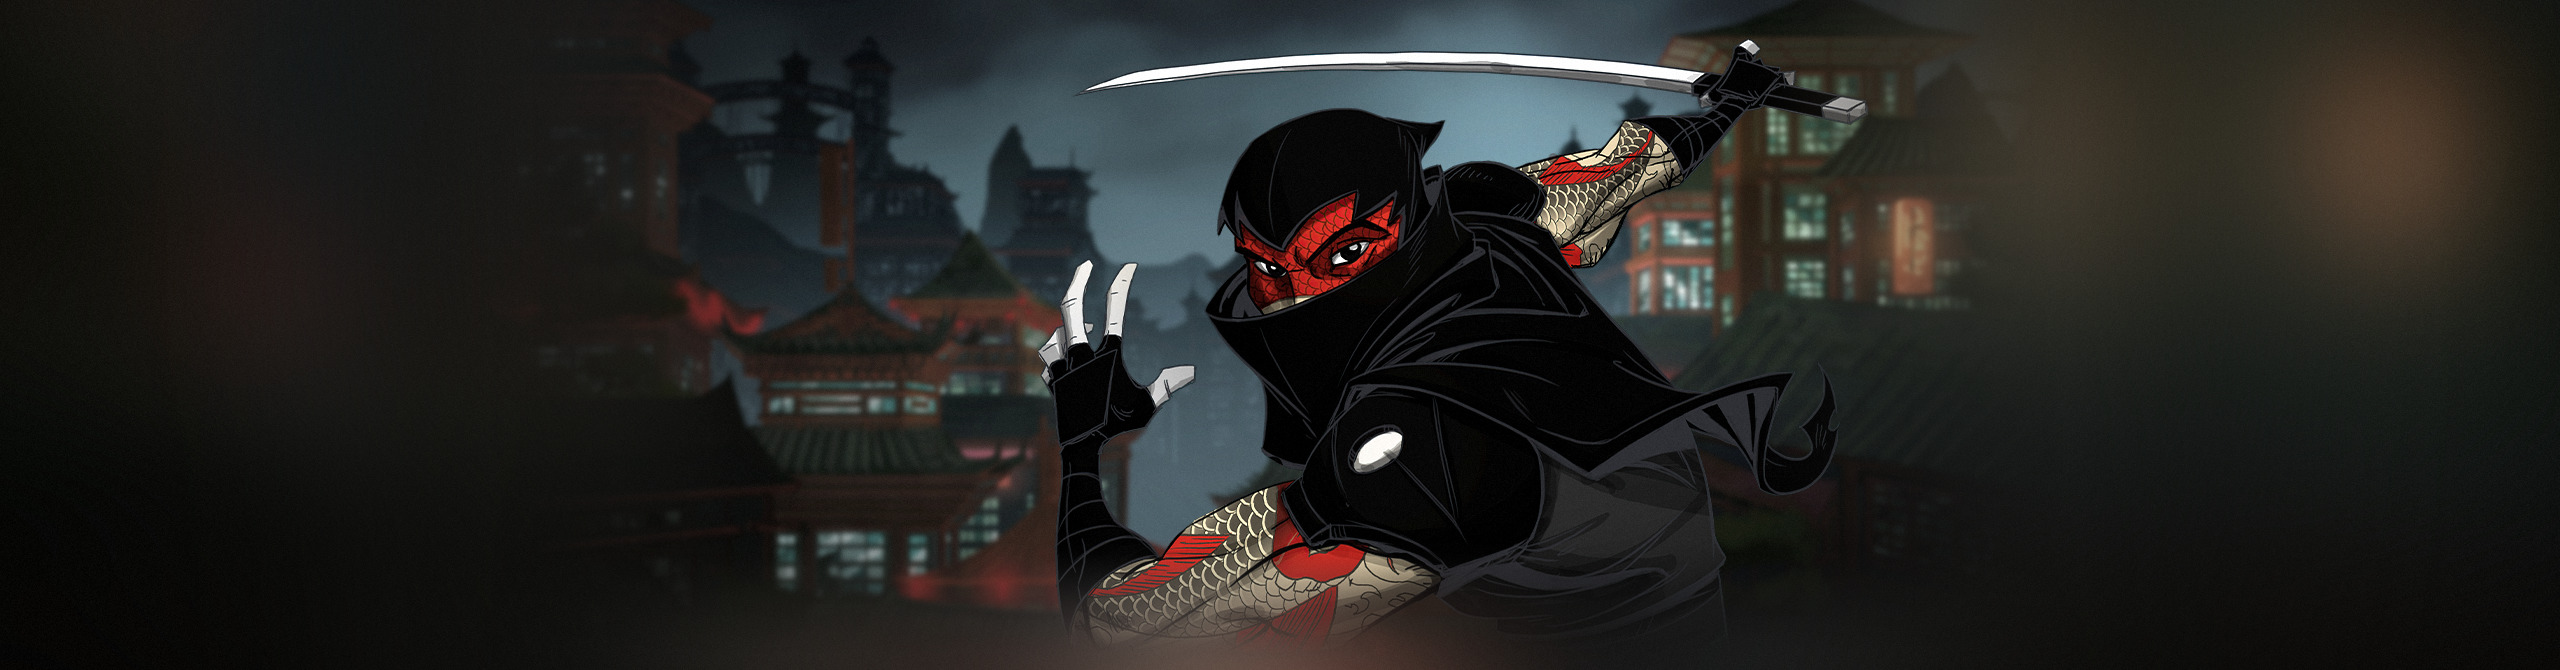 download mark of the ninja gog for free